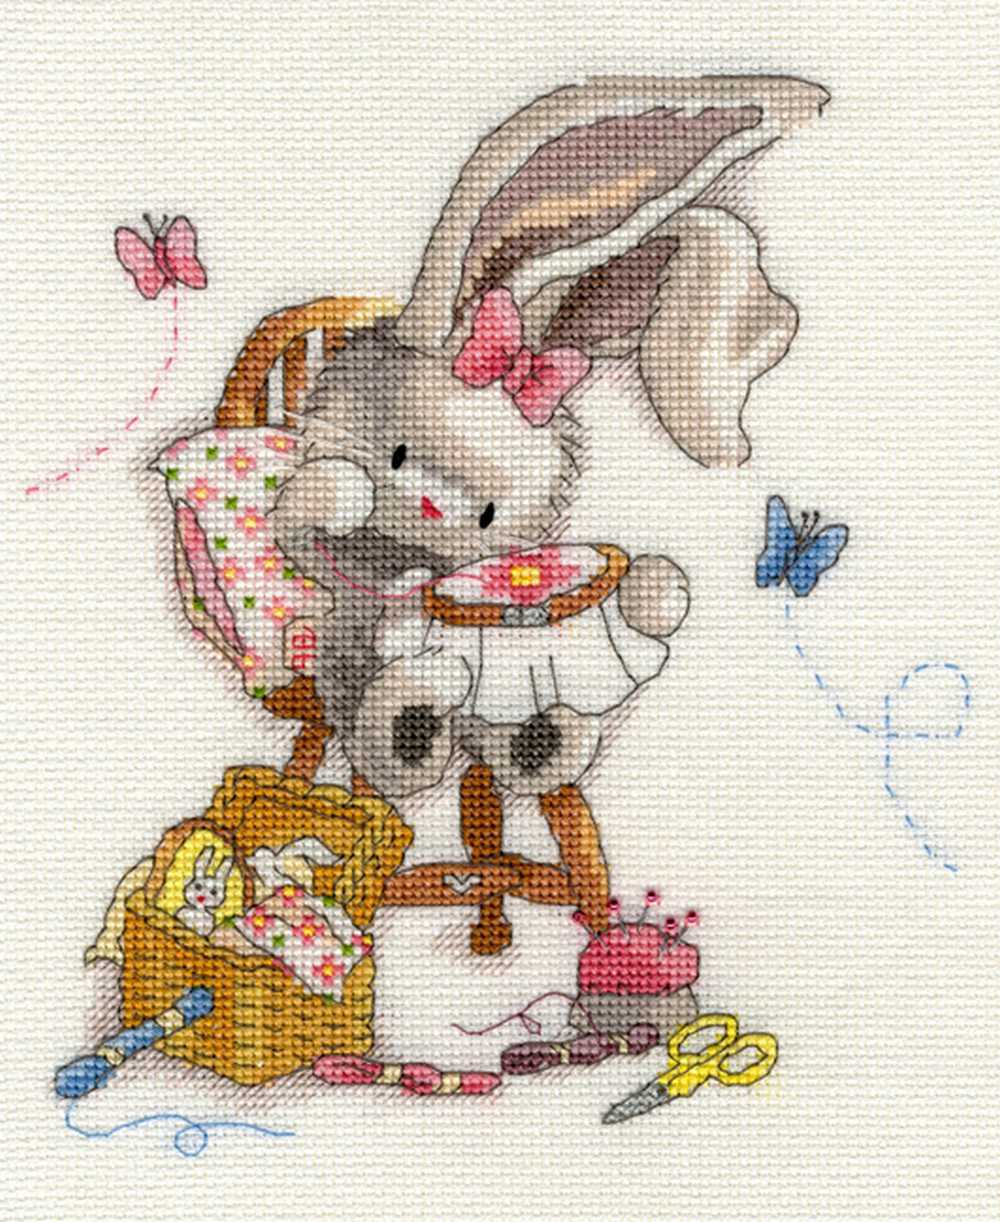 Bebunni - Sewn With Love - Cross Stitch Kit from Bothy Threads